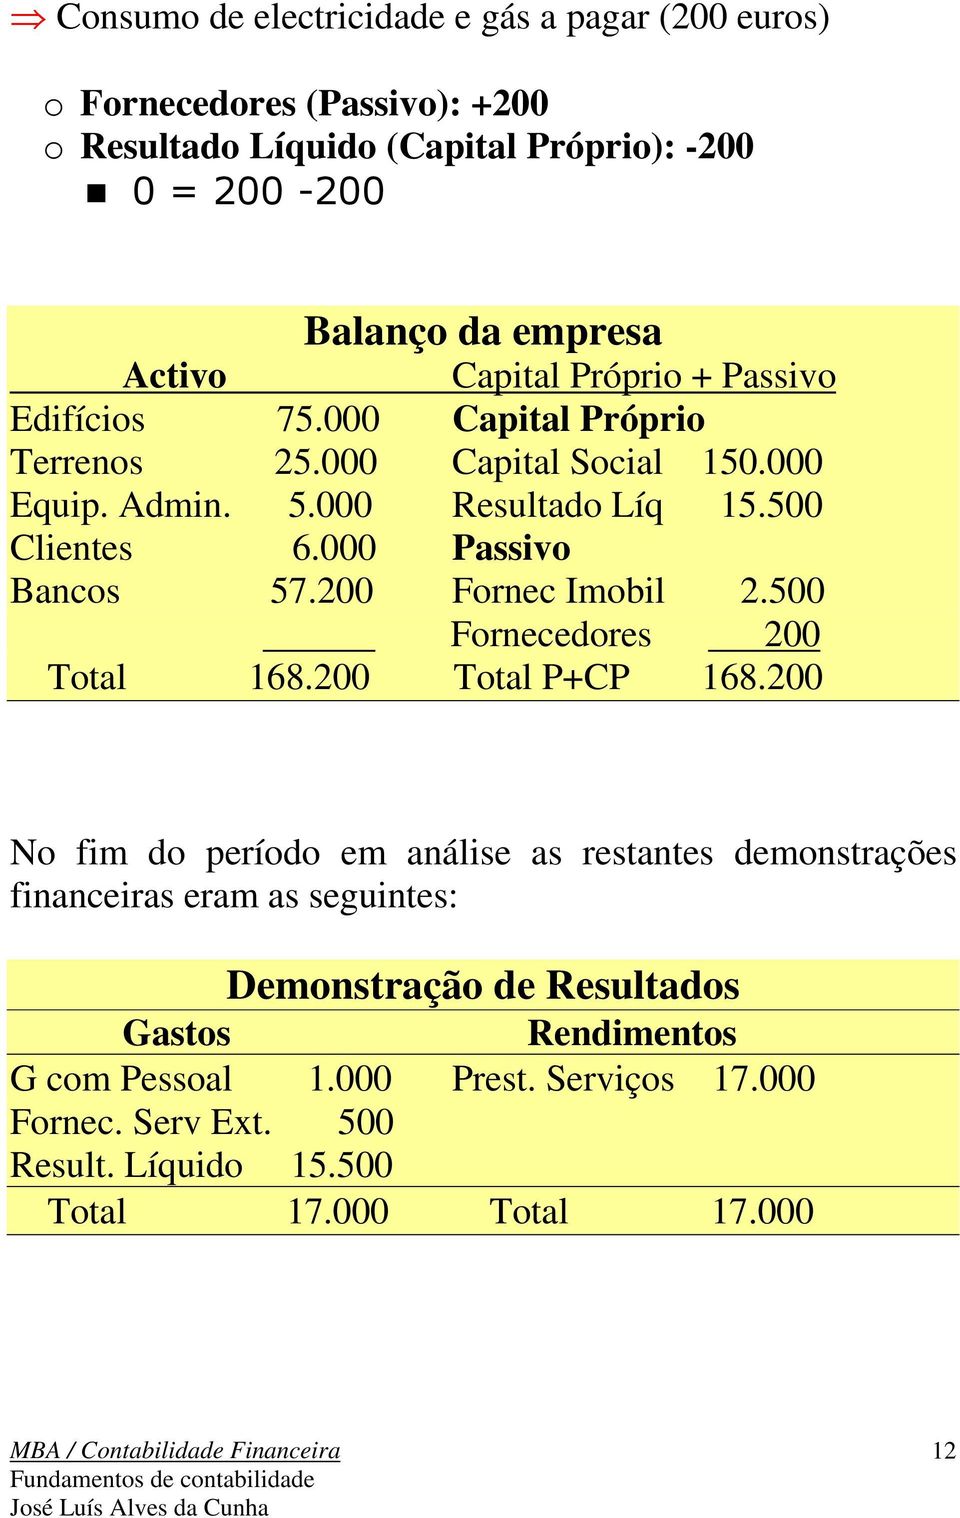 200 Fornec Imobil 2.500 Fornecedores 200 Total 168.200 Total P+CP 168.